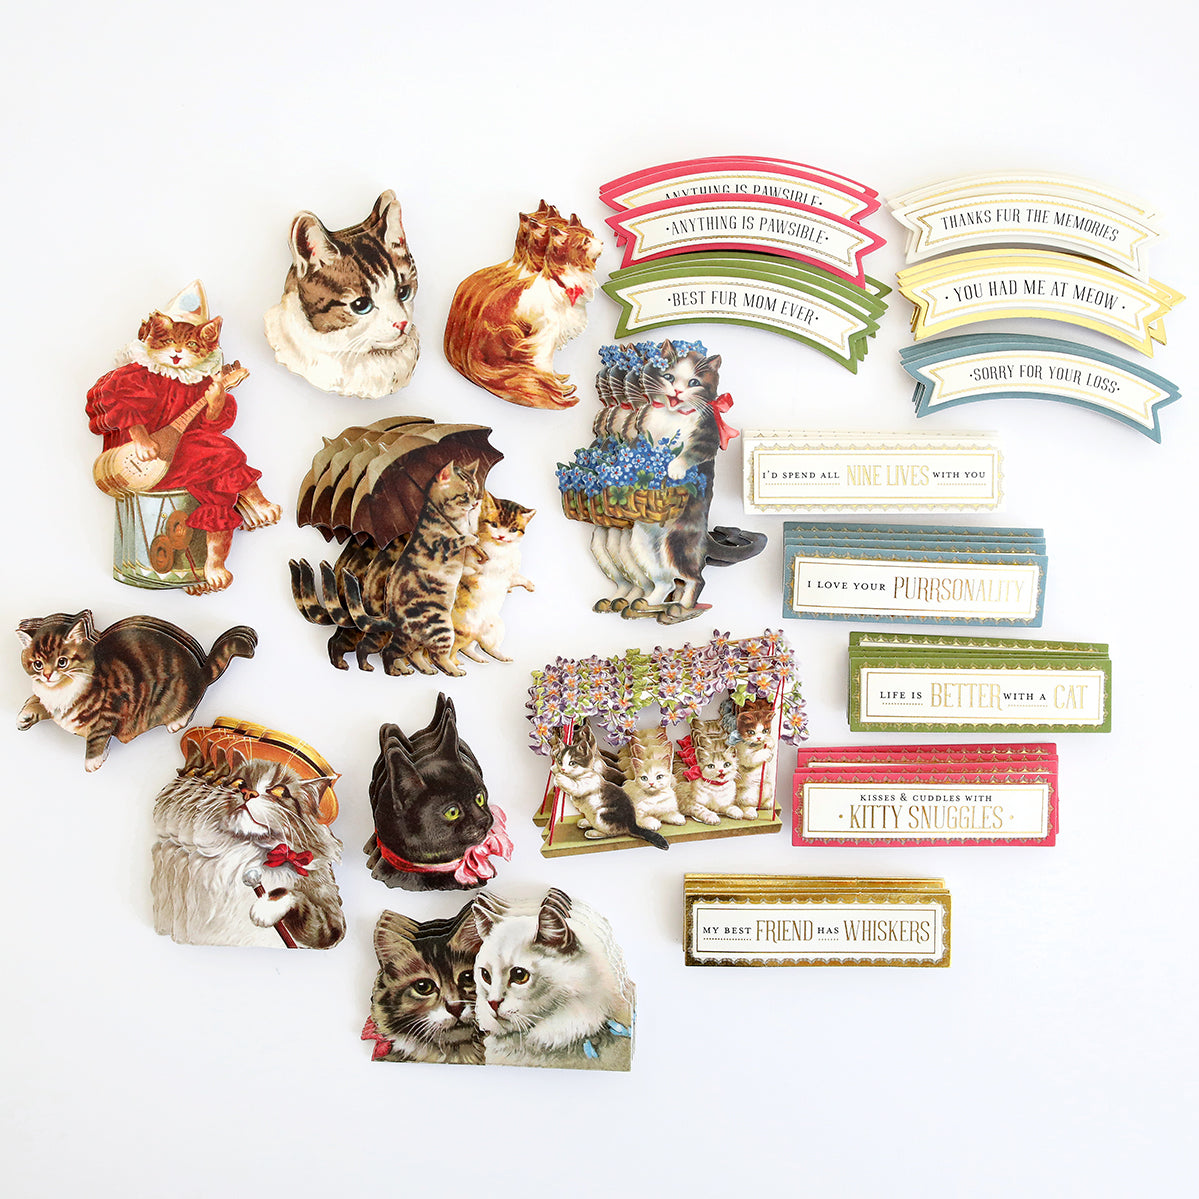 A collection of Fur Baby Cat Stickers and Sentiments with various illustrations and sentiments celebrating cats for cat lovers.